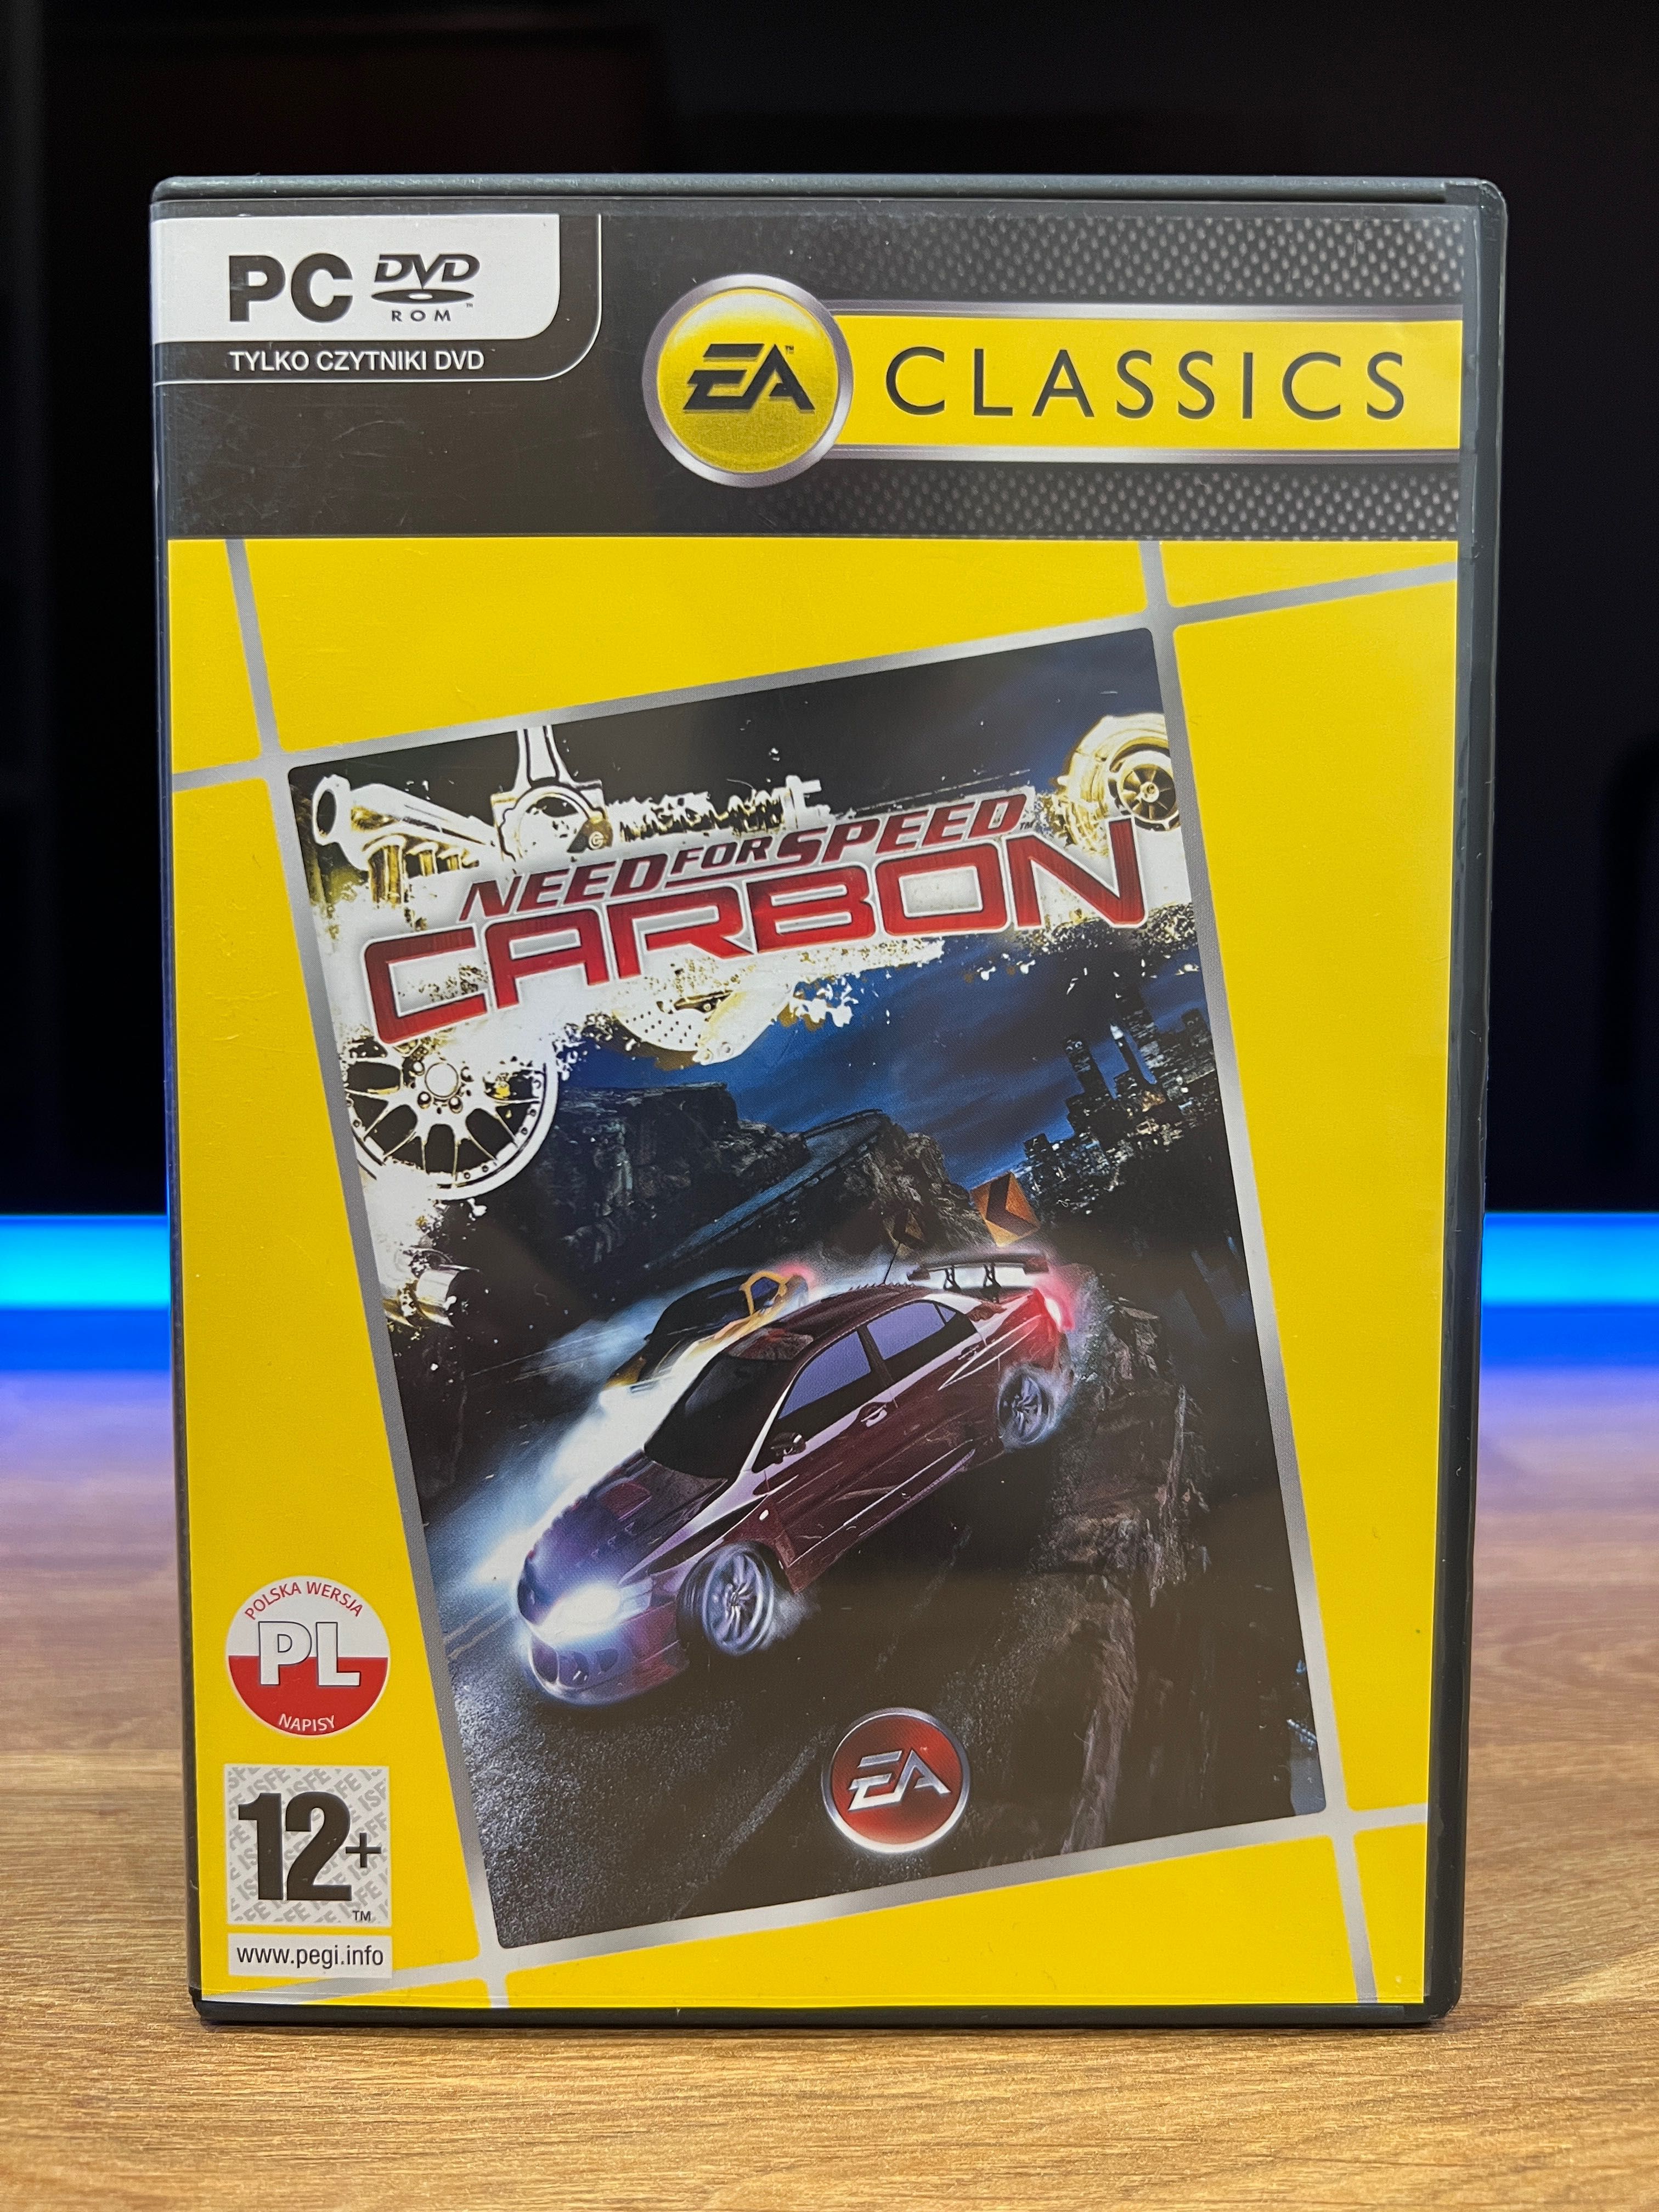 Need For Speed Carbon (PC PL 2006) DVD BOX EA Classics